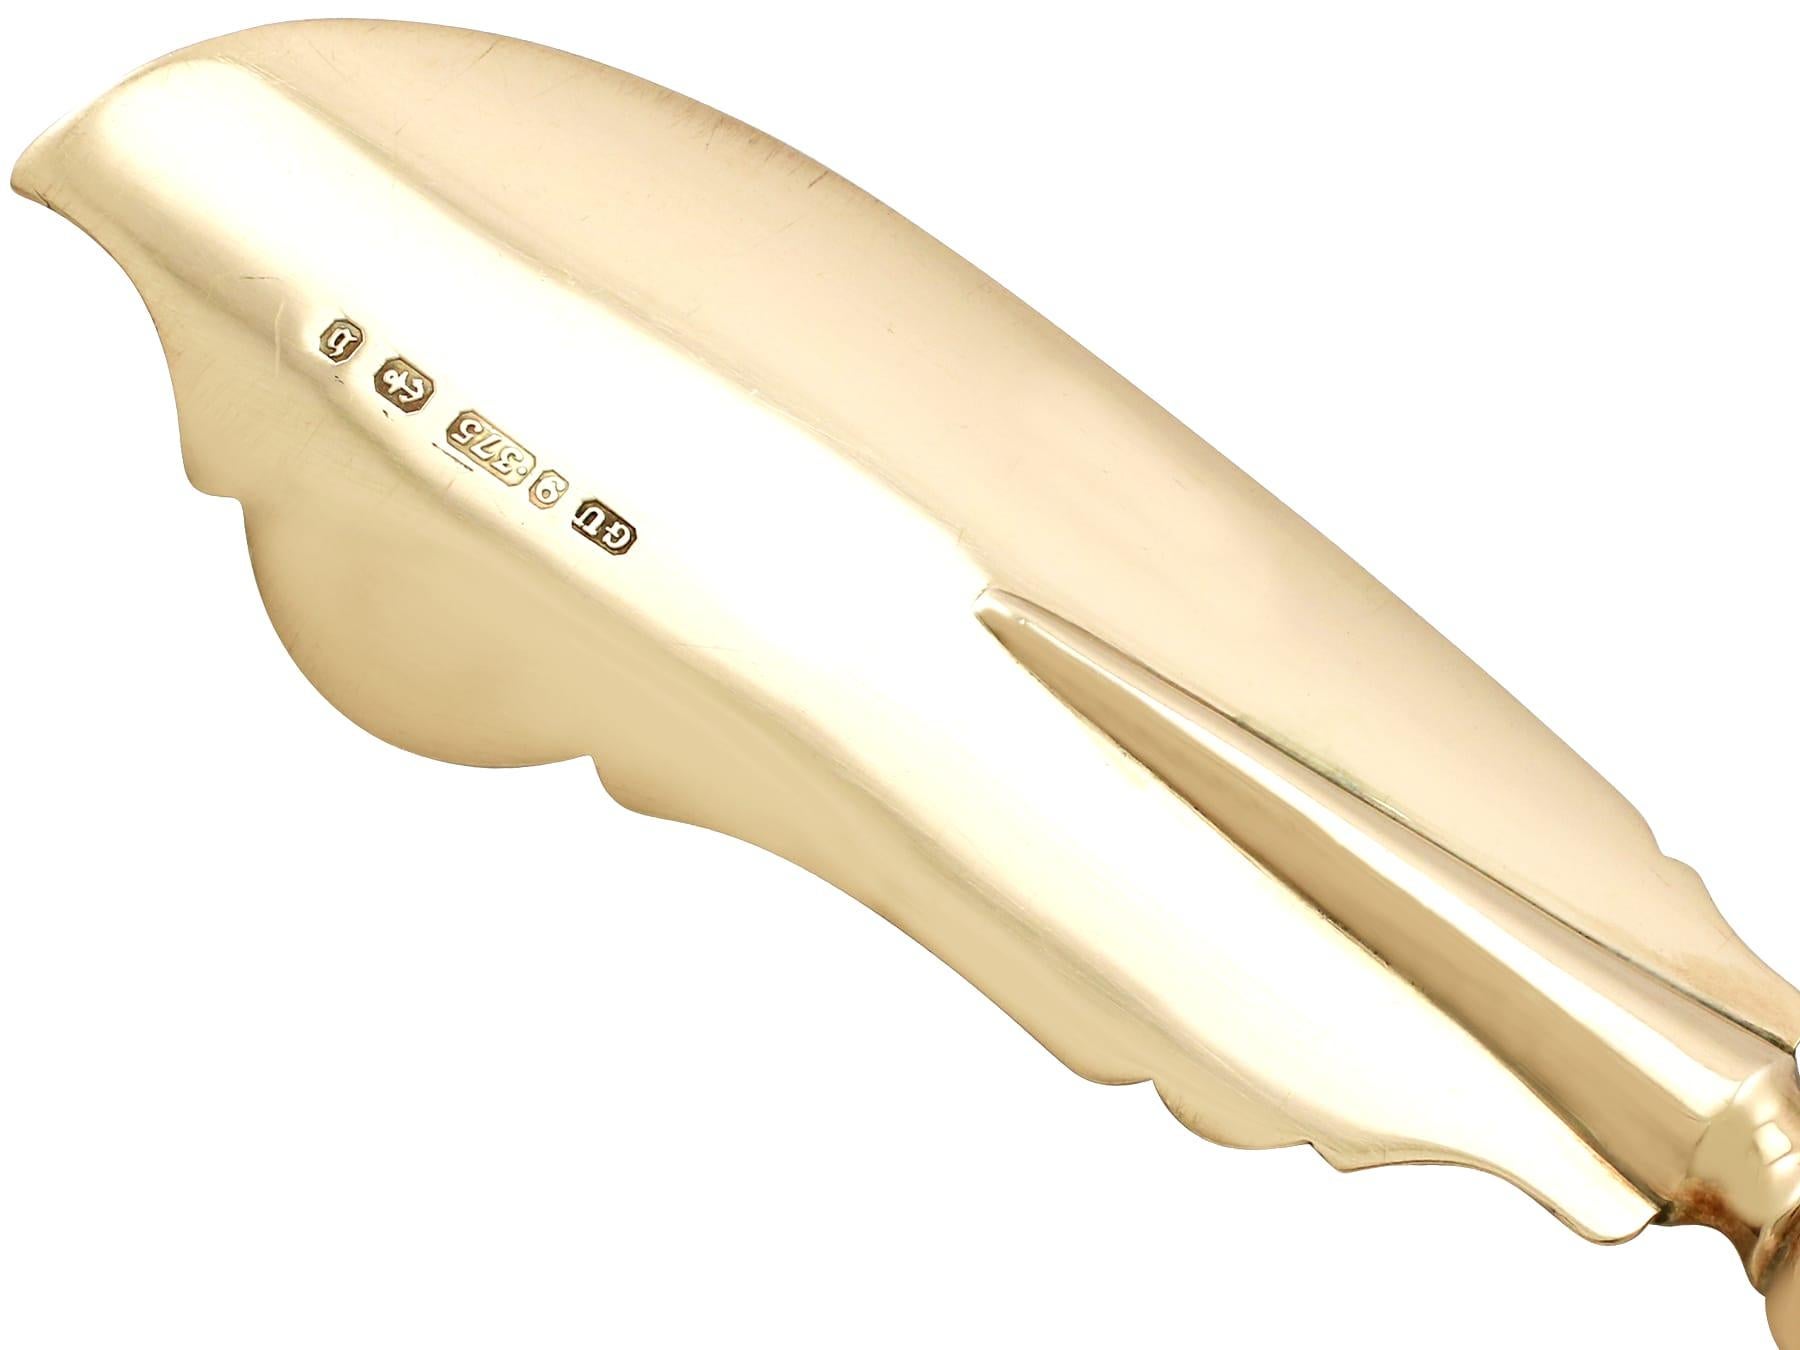 Victorian Gold and Mother of Pearl Handled Butter Knife In Excellent Condition For Sale In Jesmond, Newcastle Upon Tyne